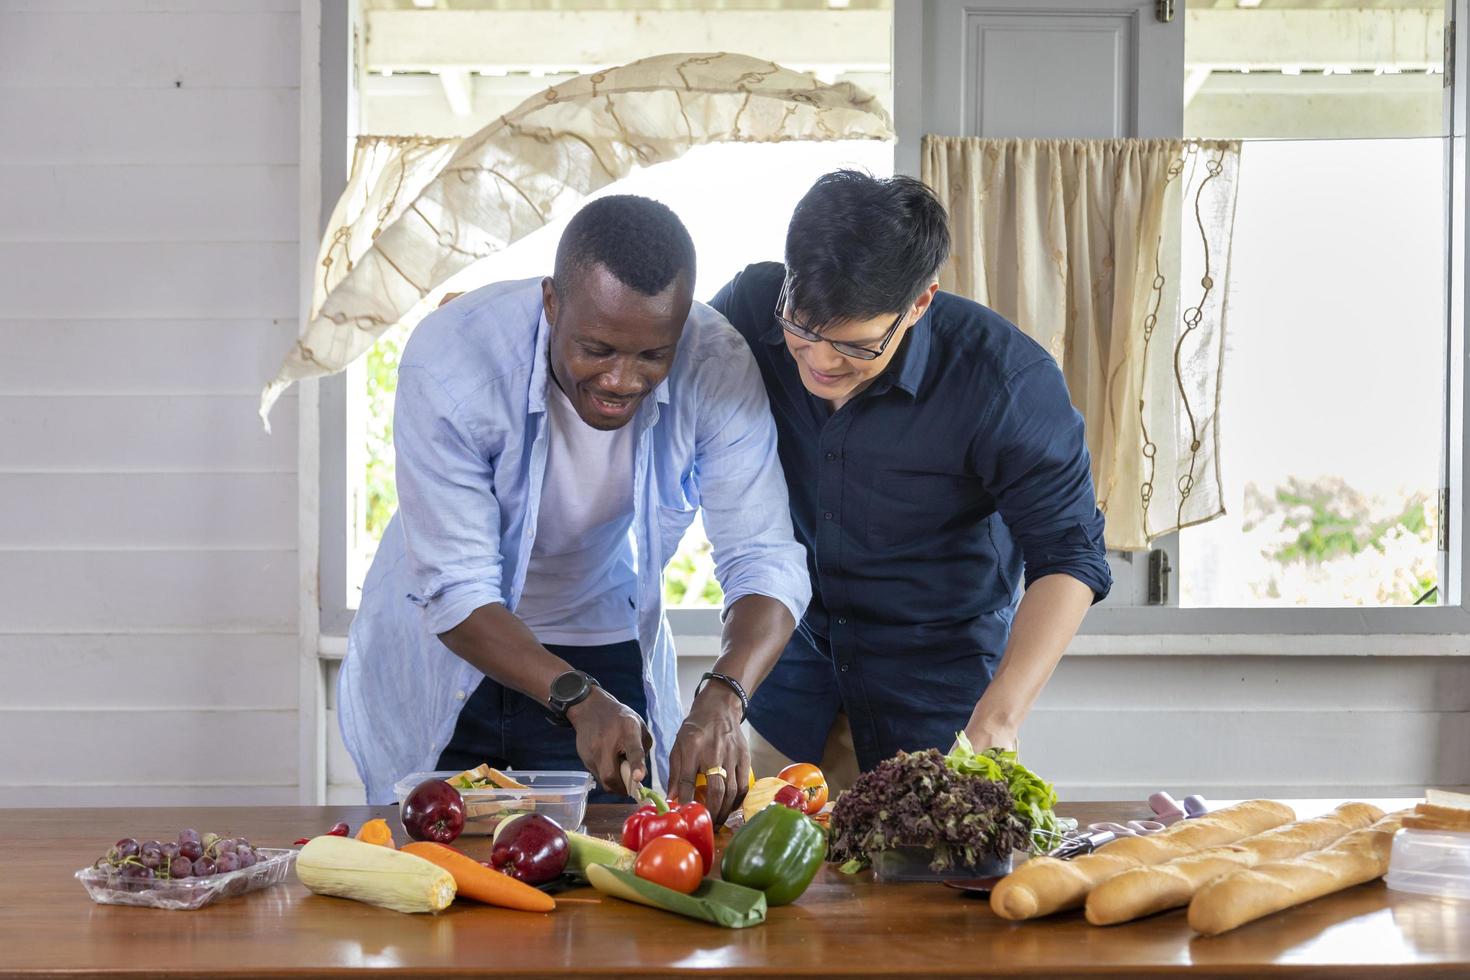 Diversity gender of LGBTQ gay couple between Asian and African ethnicity cooking together at home using organic vegetable to make salad and sandwich photo